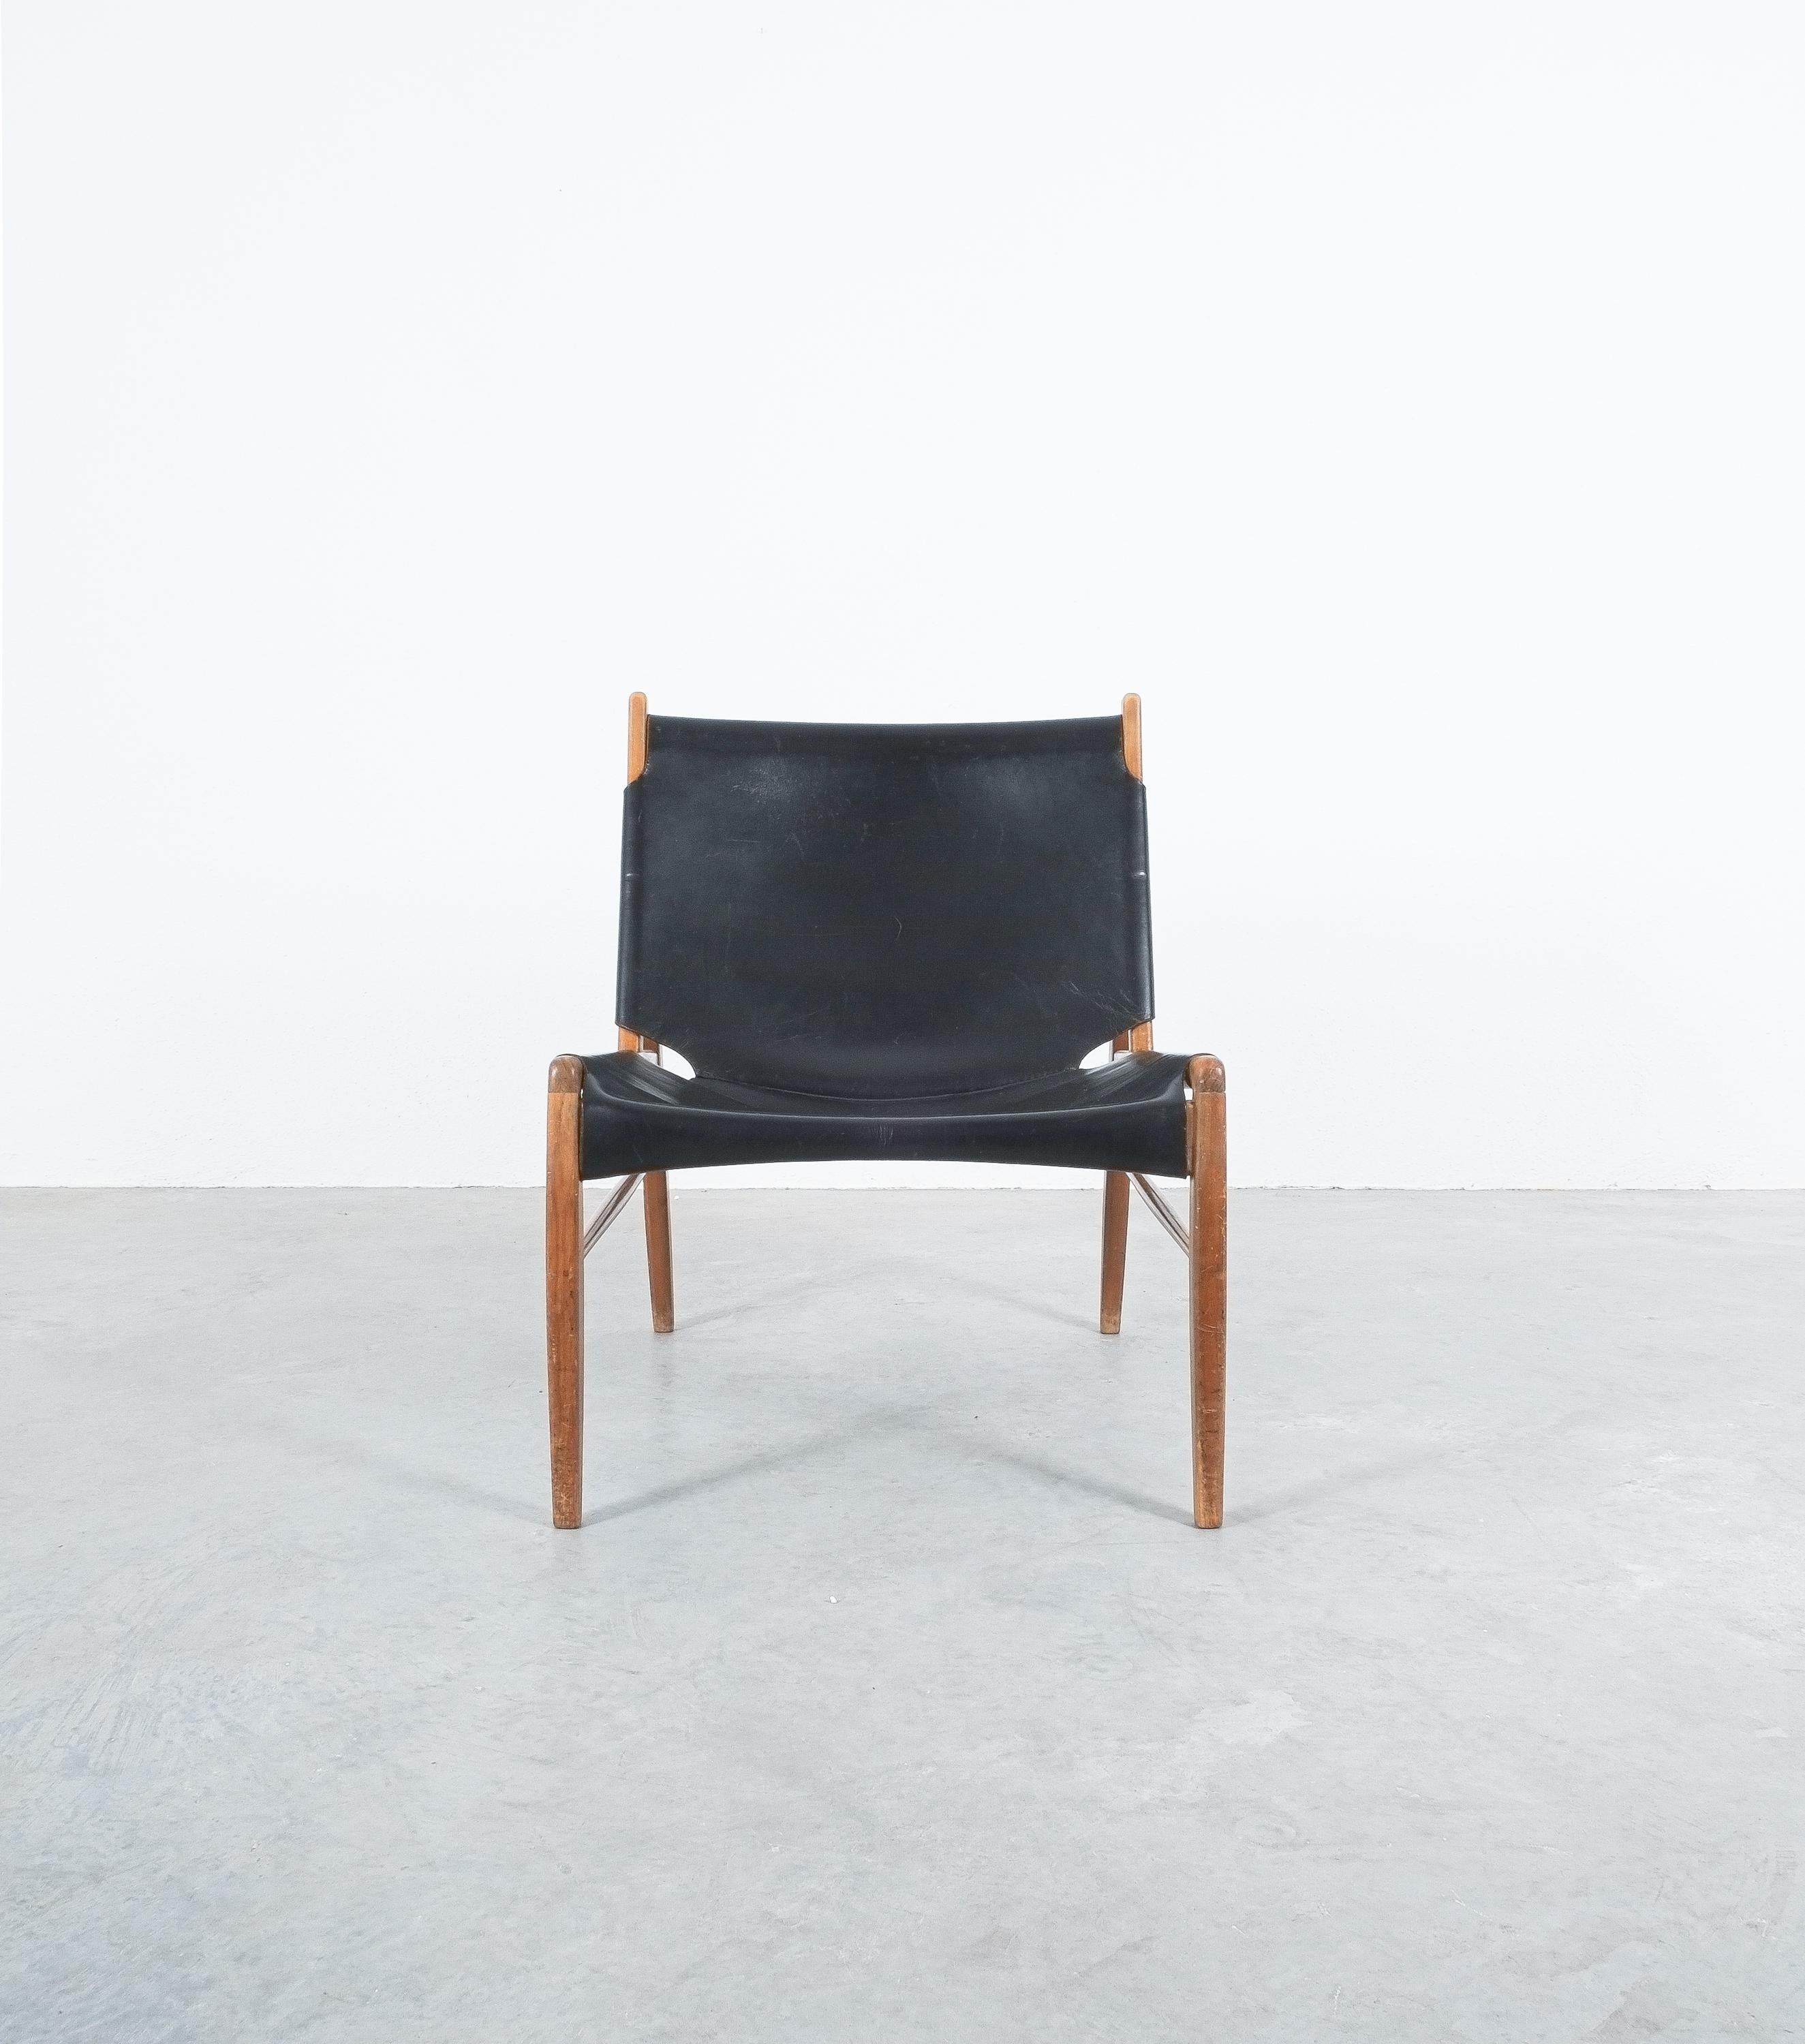 Mid-20th Century Pair of Franz Xaver Lutz Chimney or Hunting Chairs with Black Original Leather